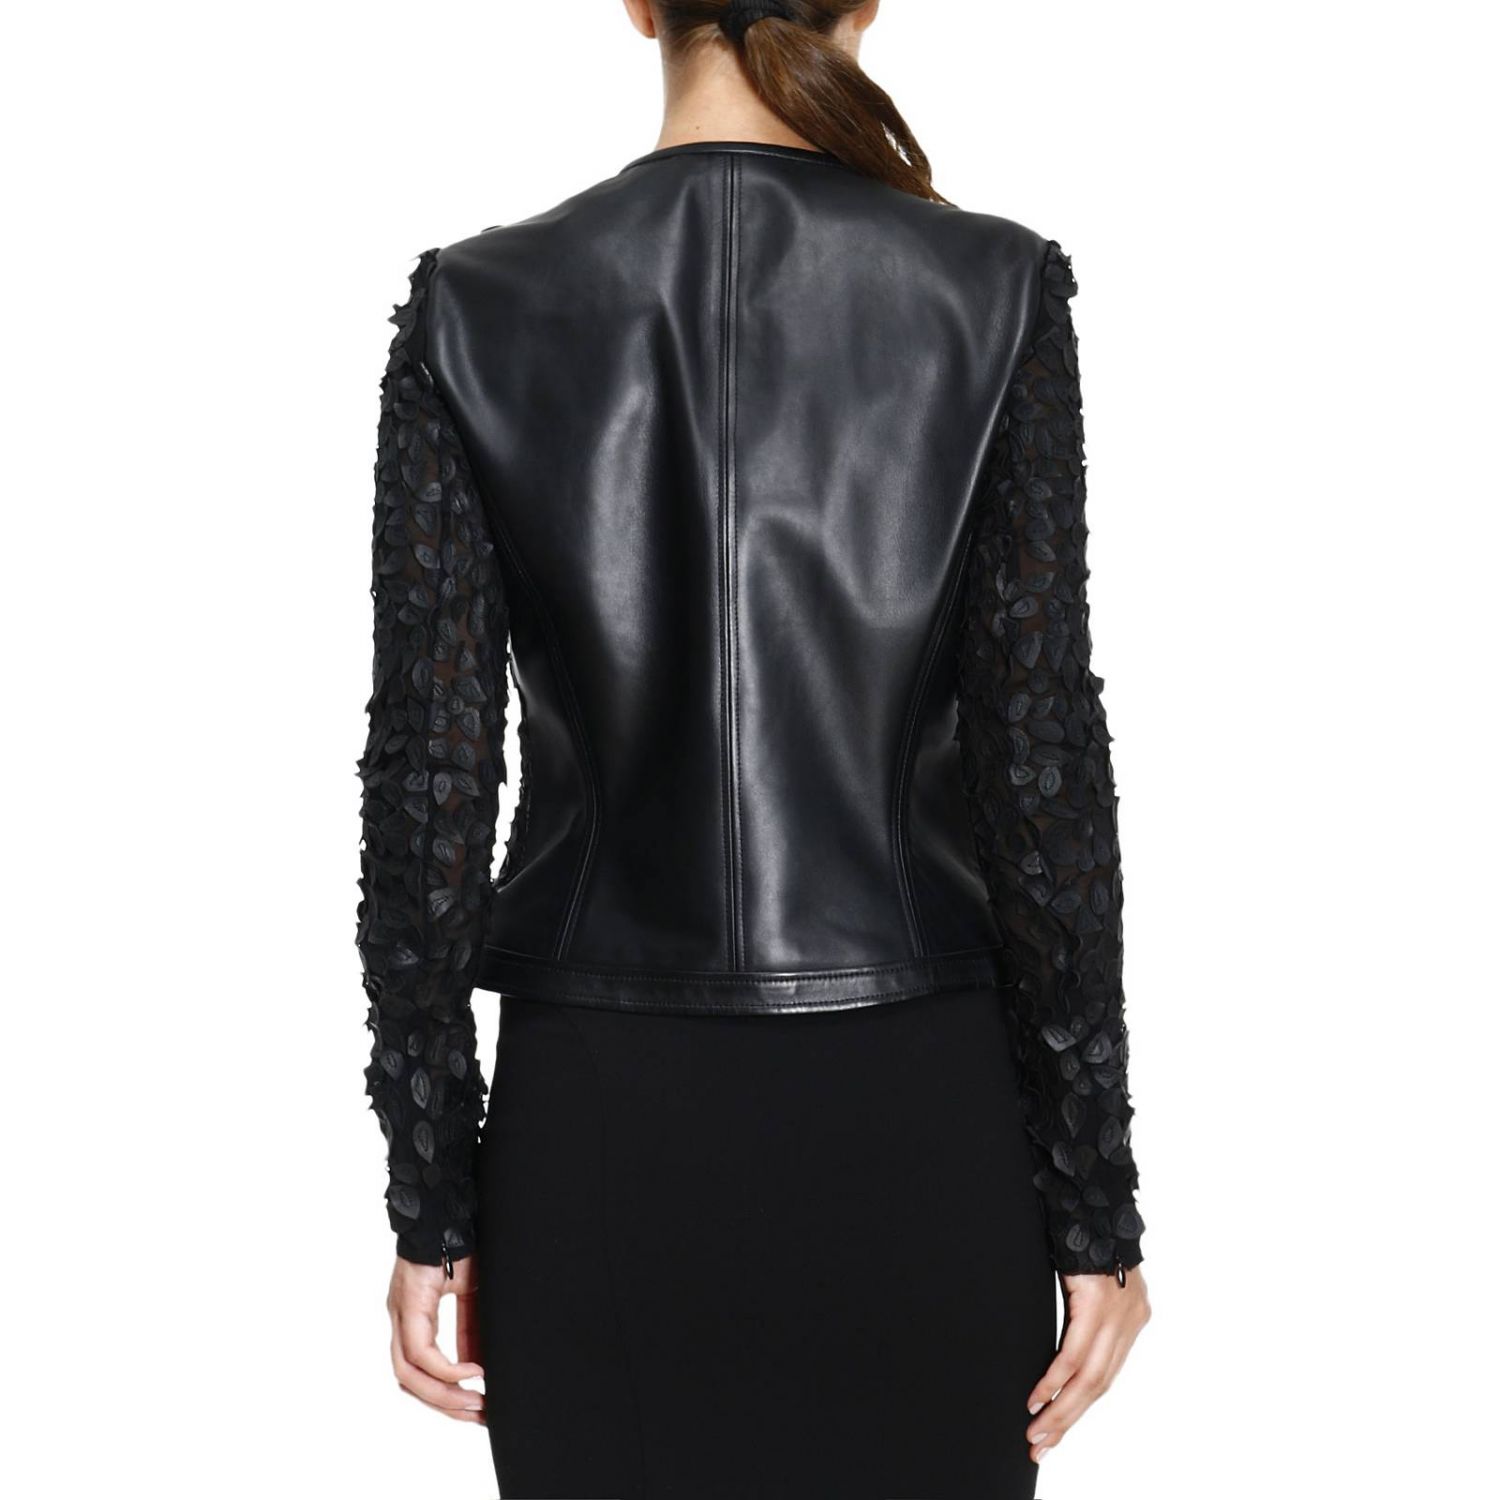 Versace Collection Outlet: Jacket women | Jacket Versace Collection ...